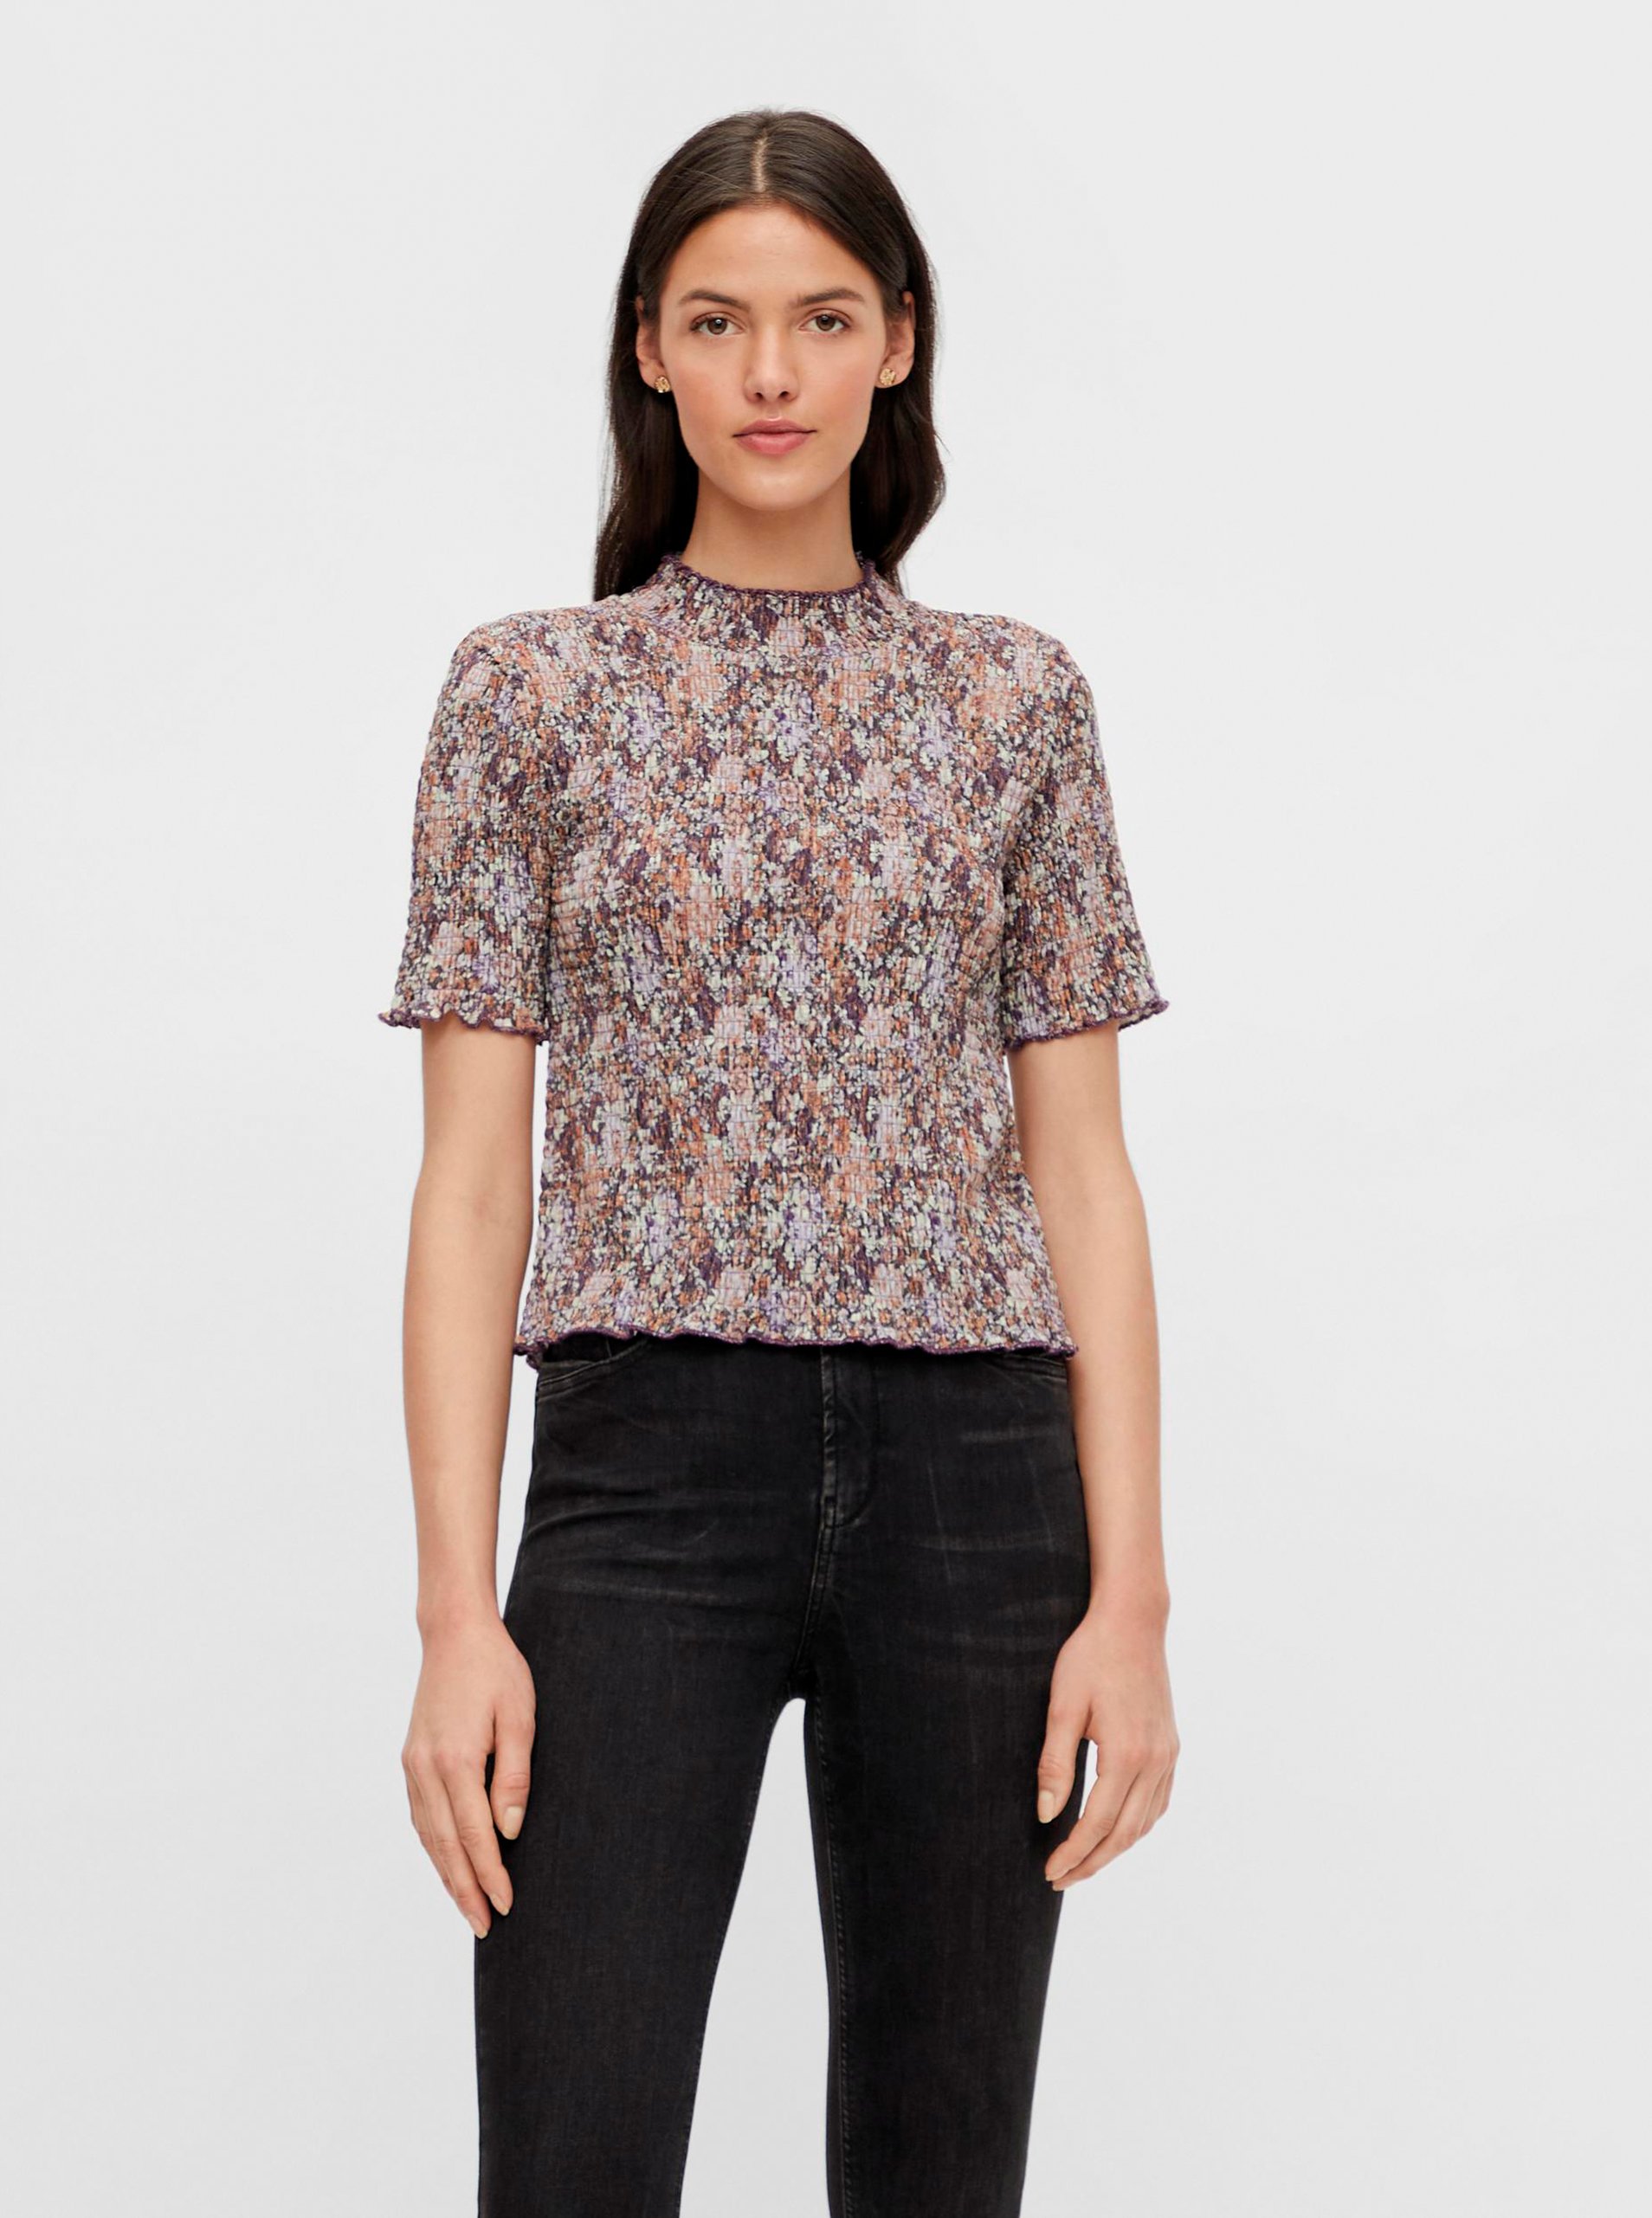 Brown Patterned Blouse Pieces Leaste - Women's